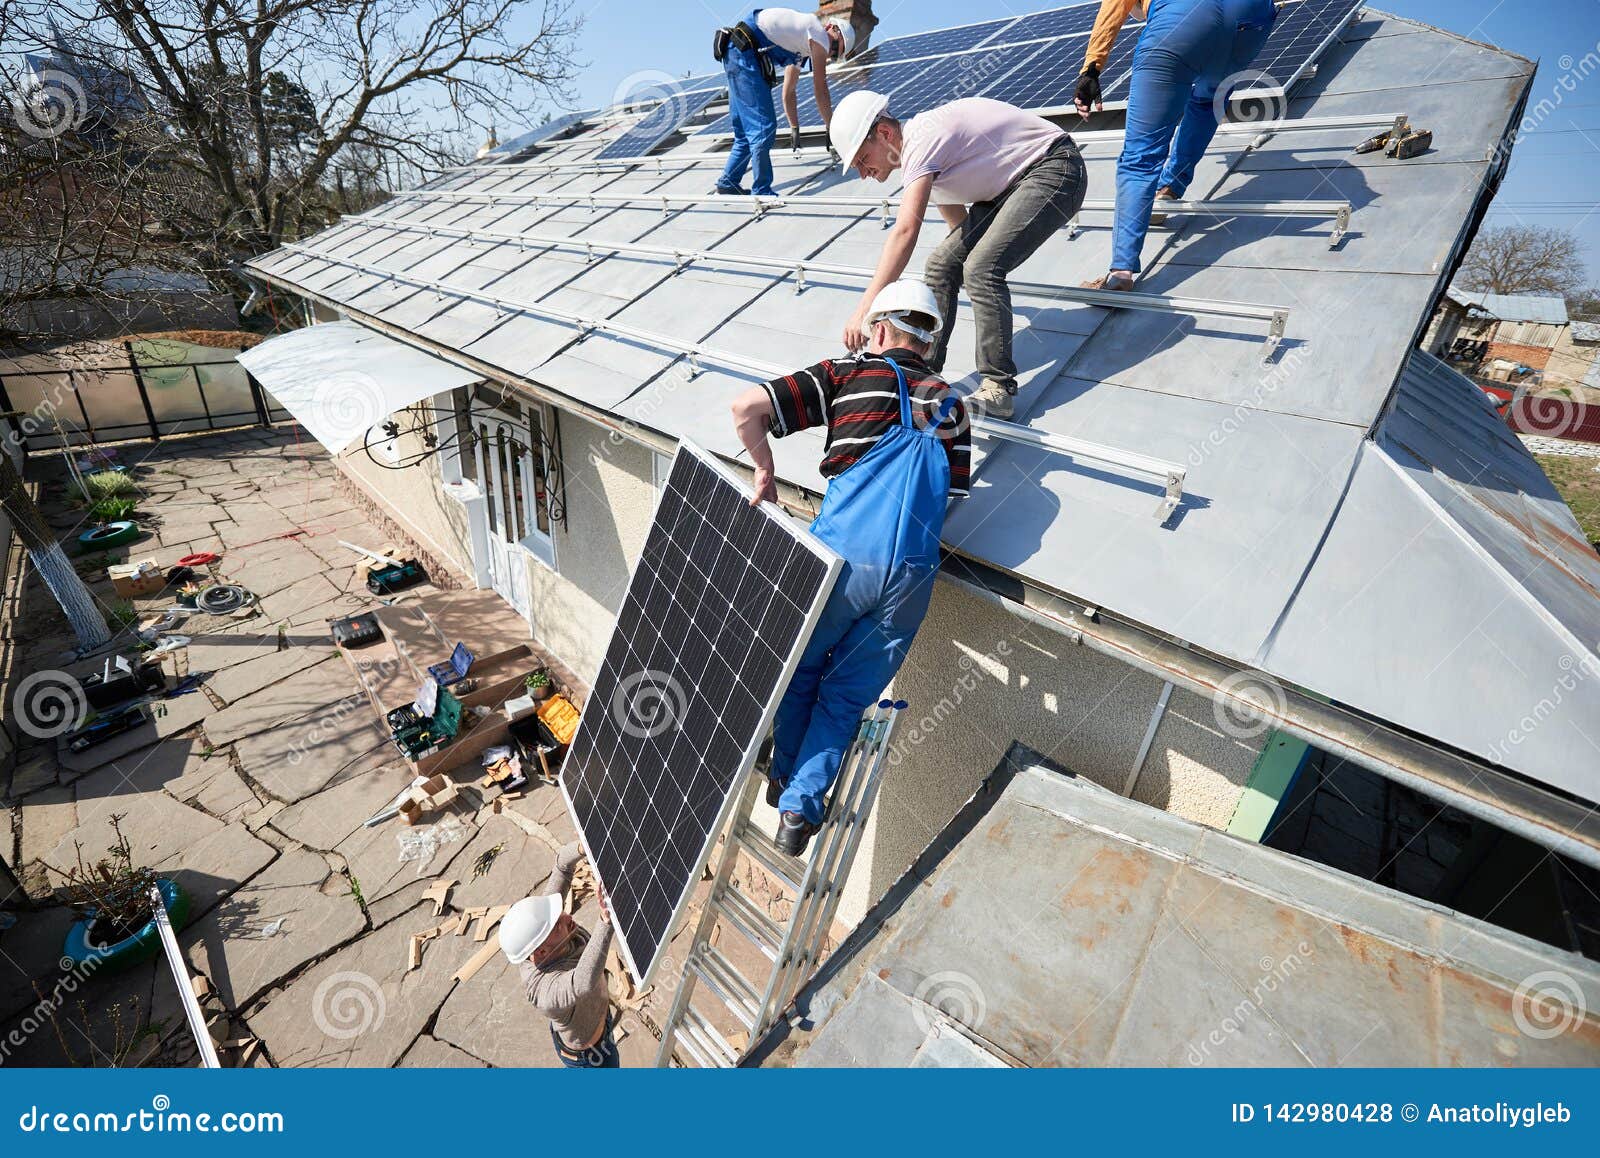 Installing Solar Photovoltaic Panel System On Roof Of House Stock Photo How To Lift Solar Panels Onto Roof